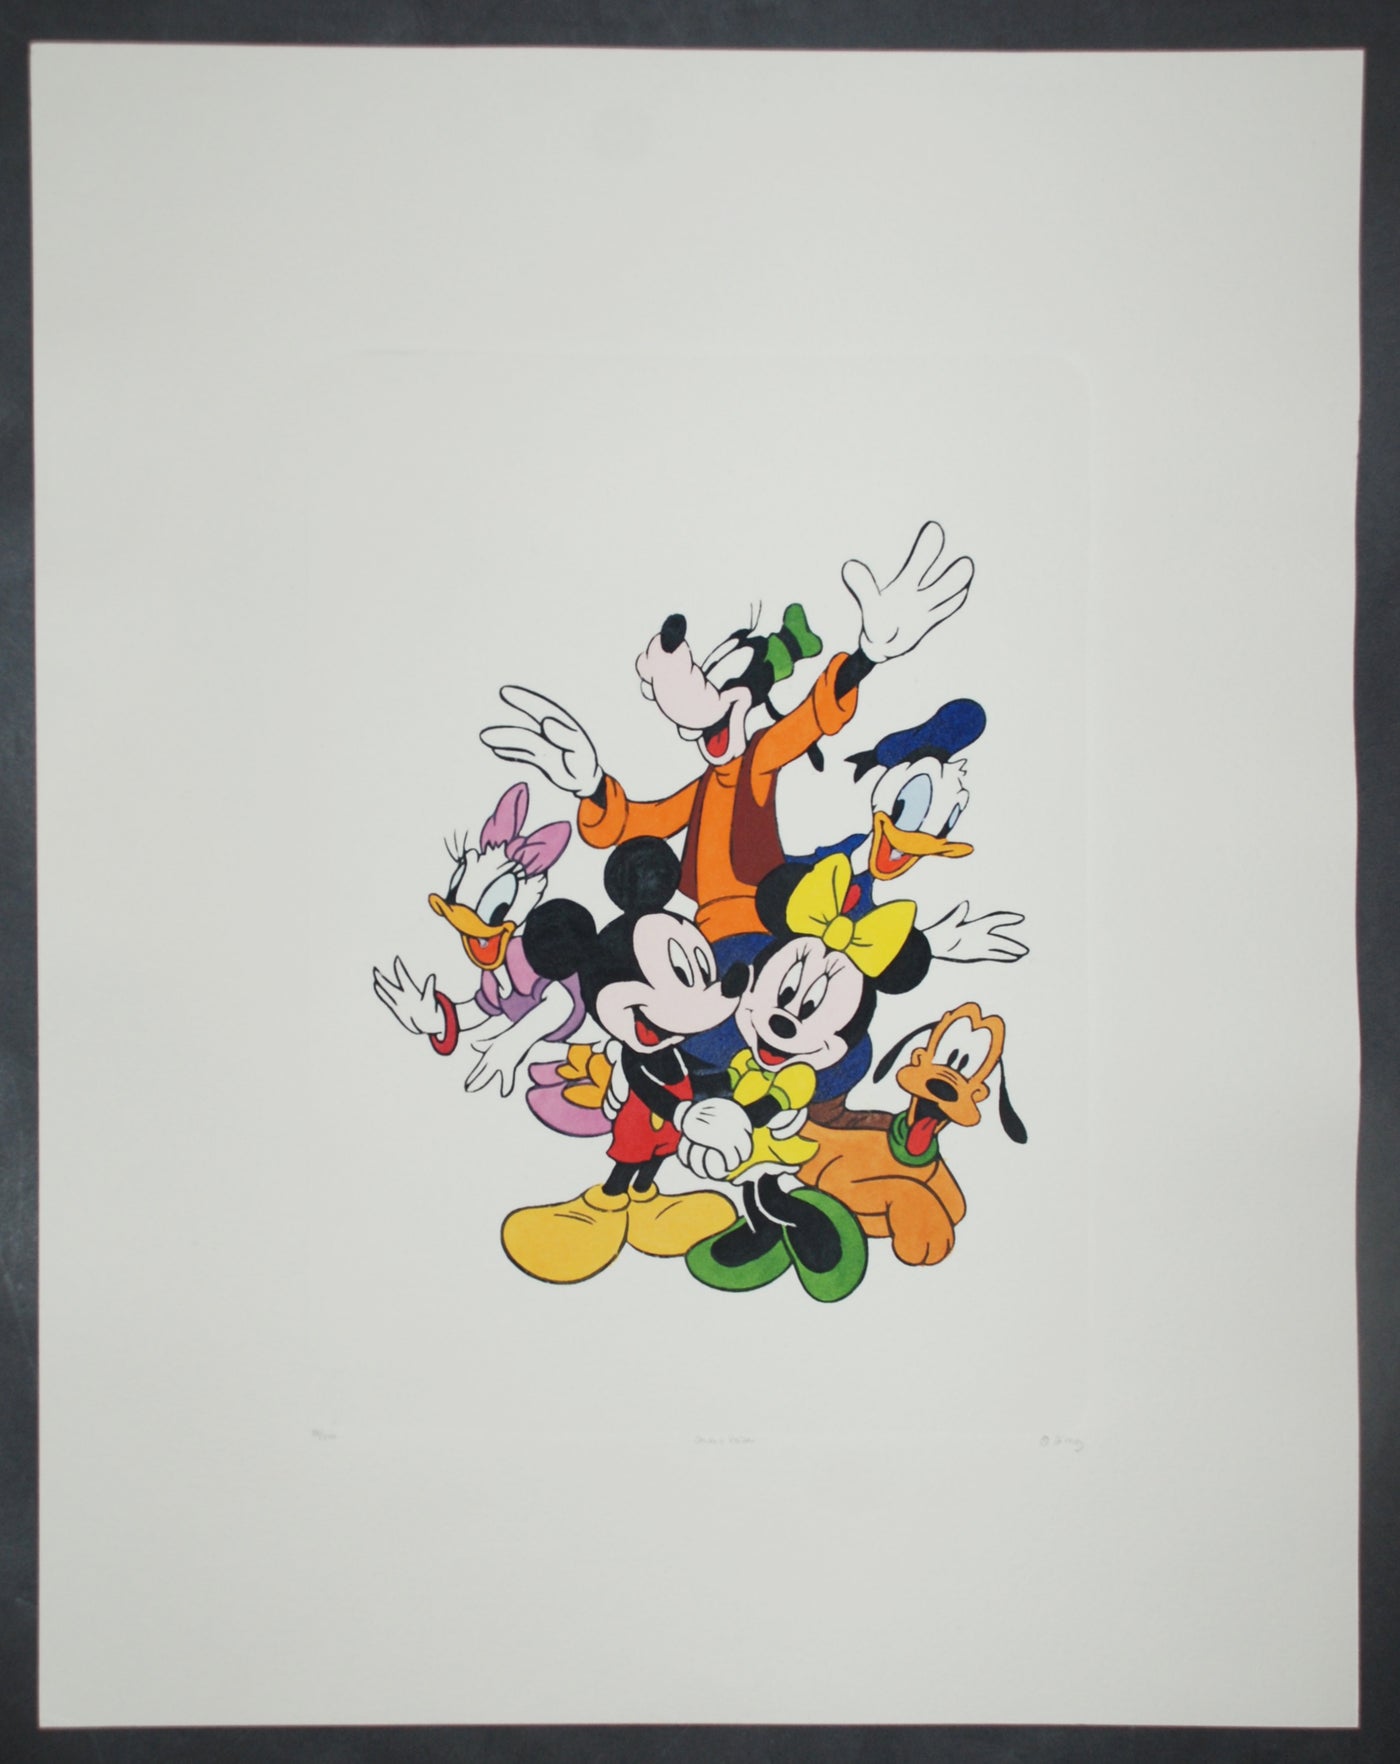 Disney Animation Art Hand Colored Etching Featuring Mickey Mouse and friends